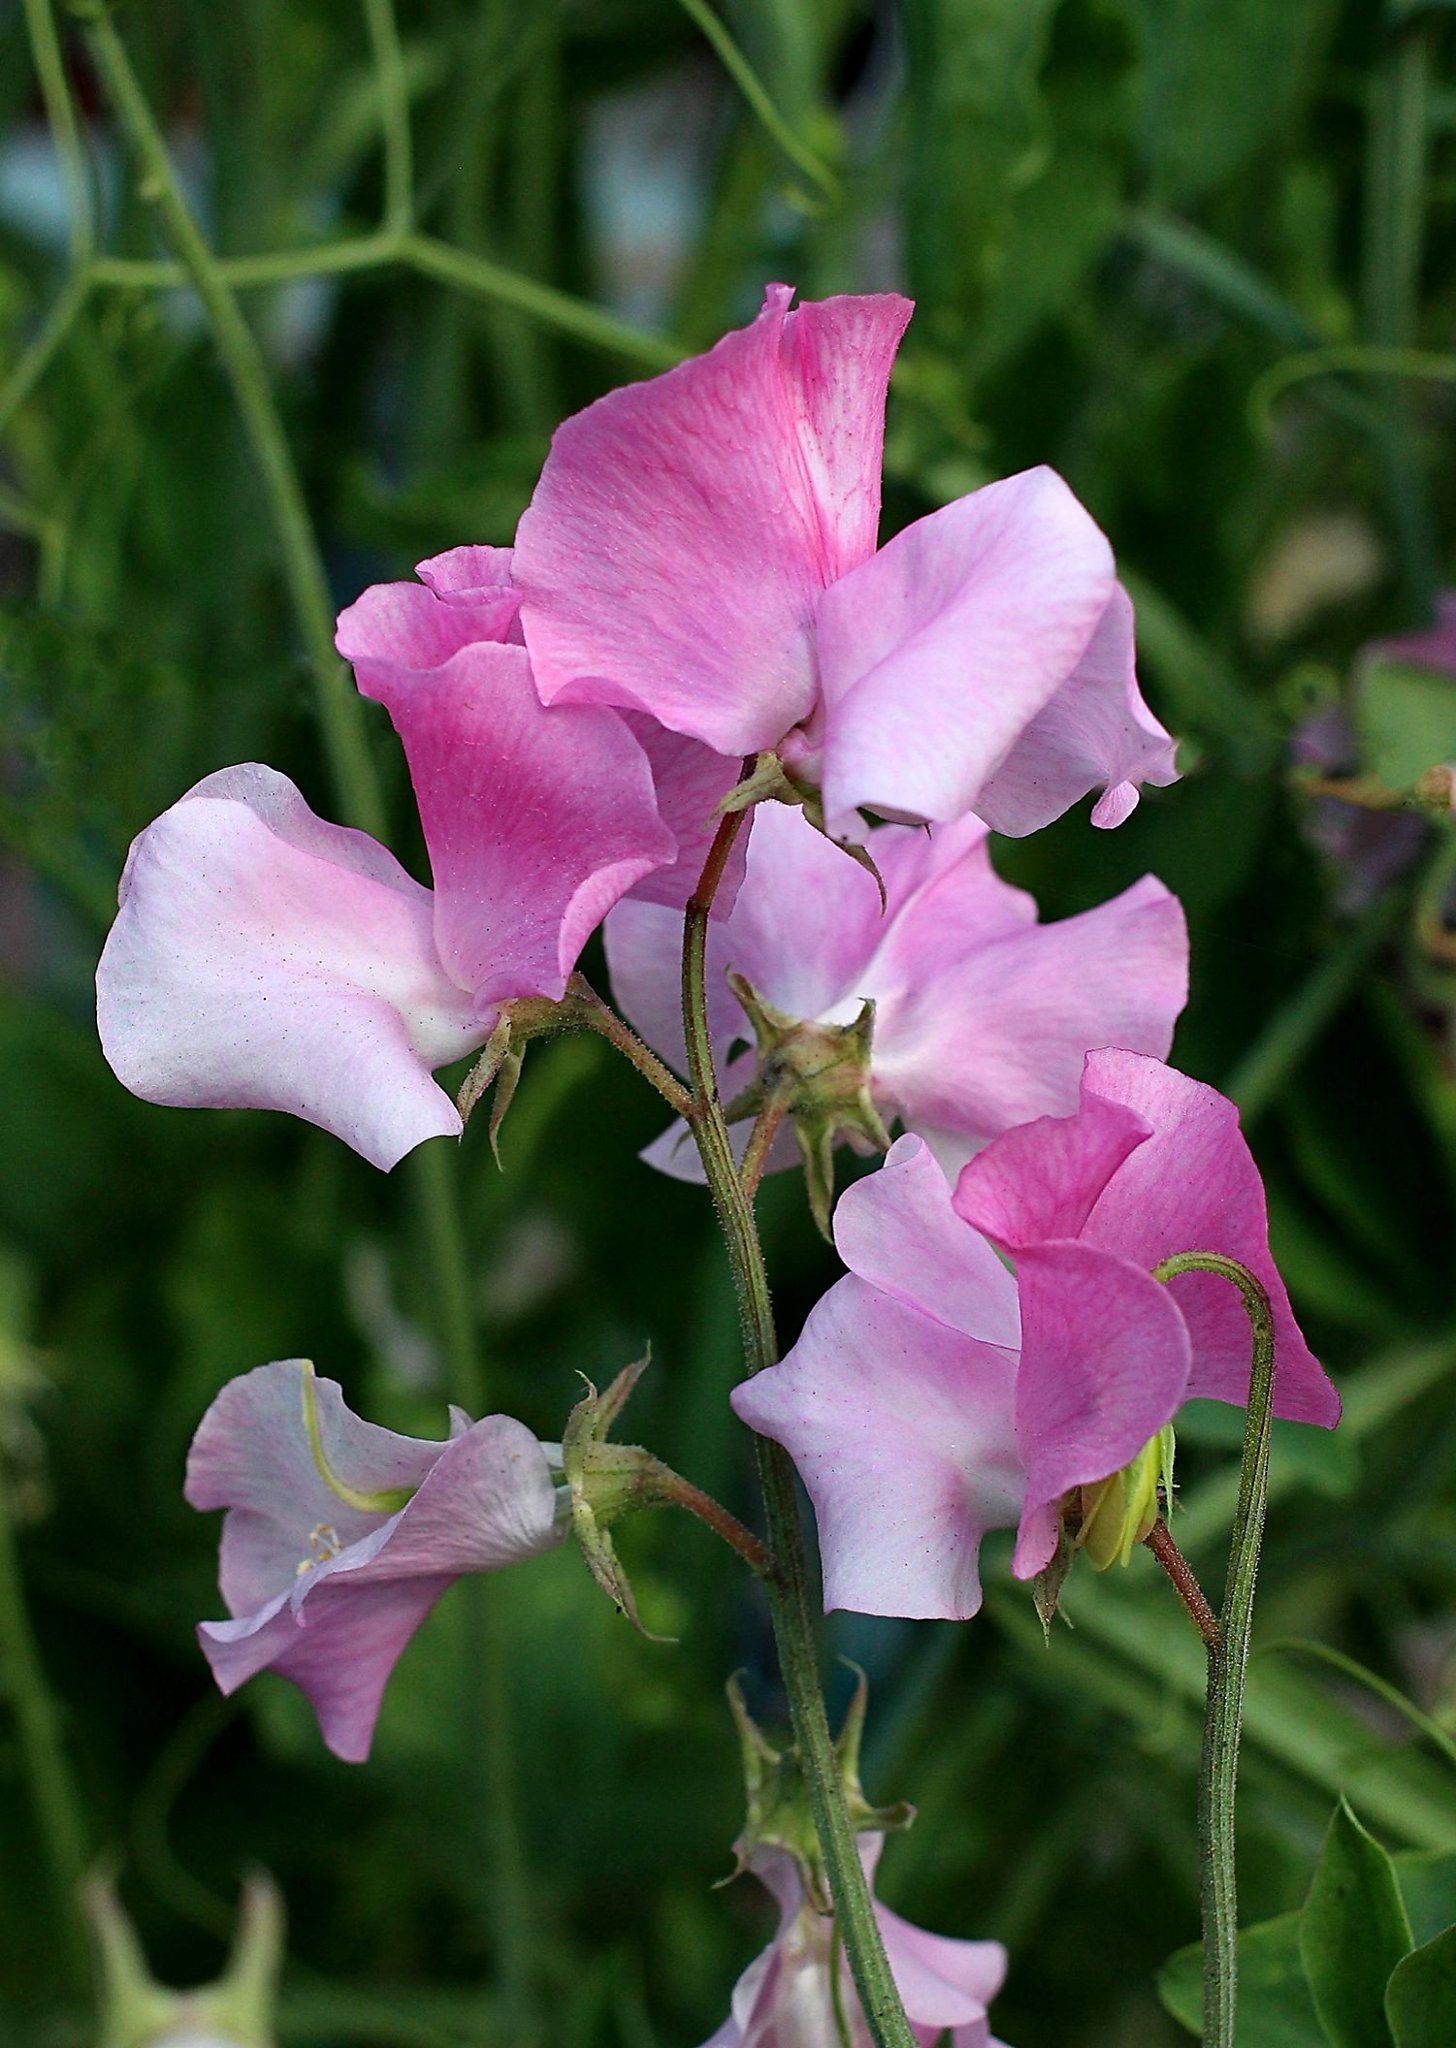 Shake up winter blues with colorful sweet peas - San Francisco Chronicle